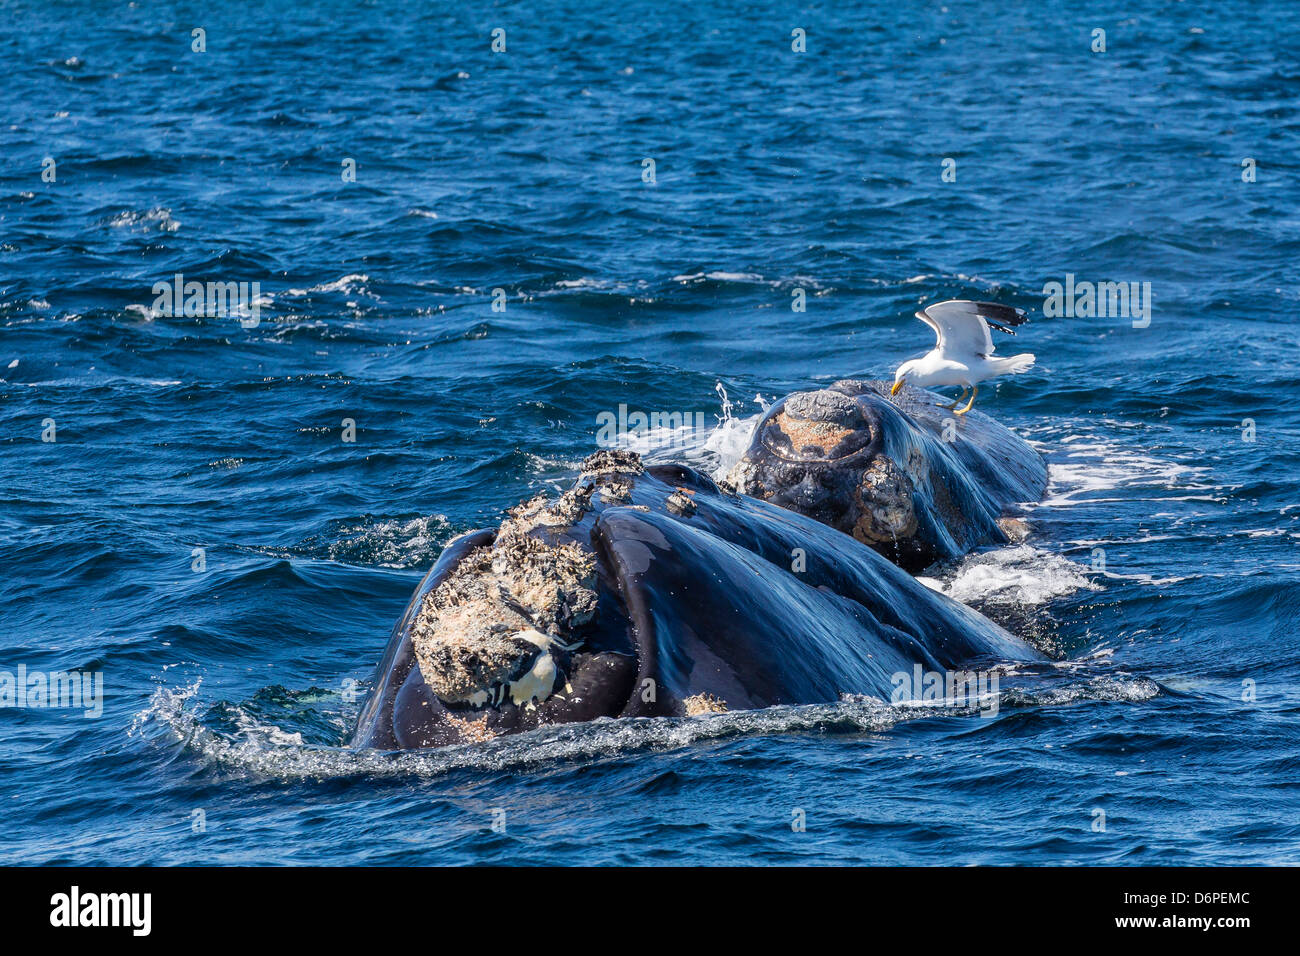 Southern right whale (Eubalaena australis) calf being fed upon by kelp gull, Golfo Nuevo, Peninsula Valdes, Argentina Stock Photo